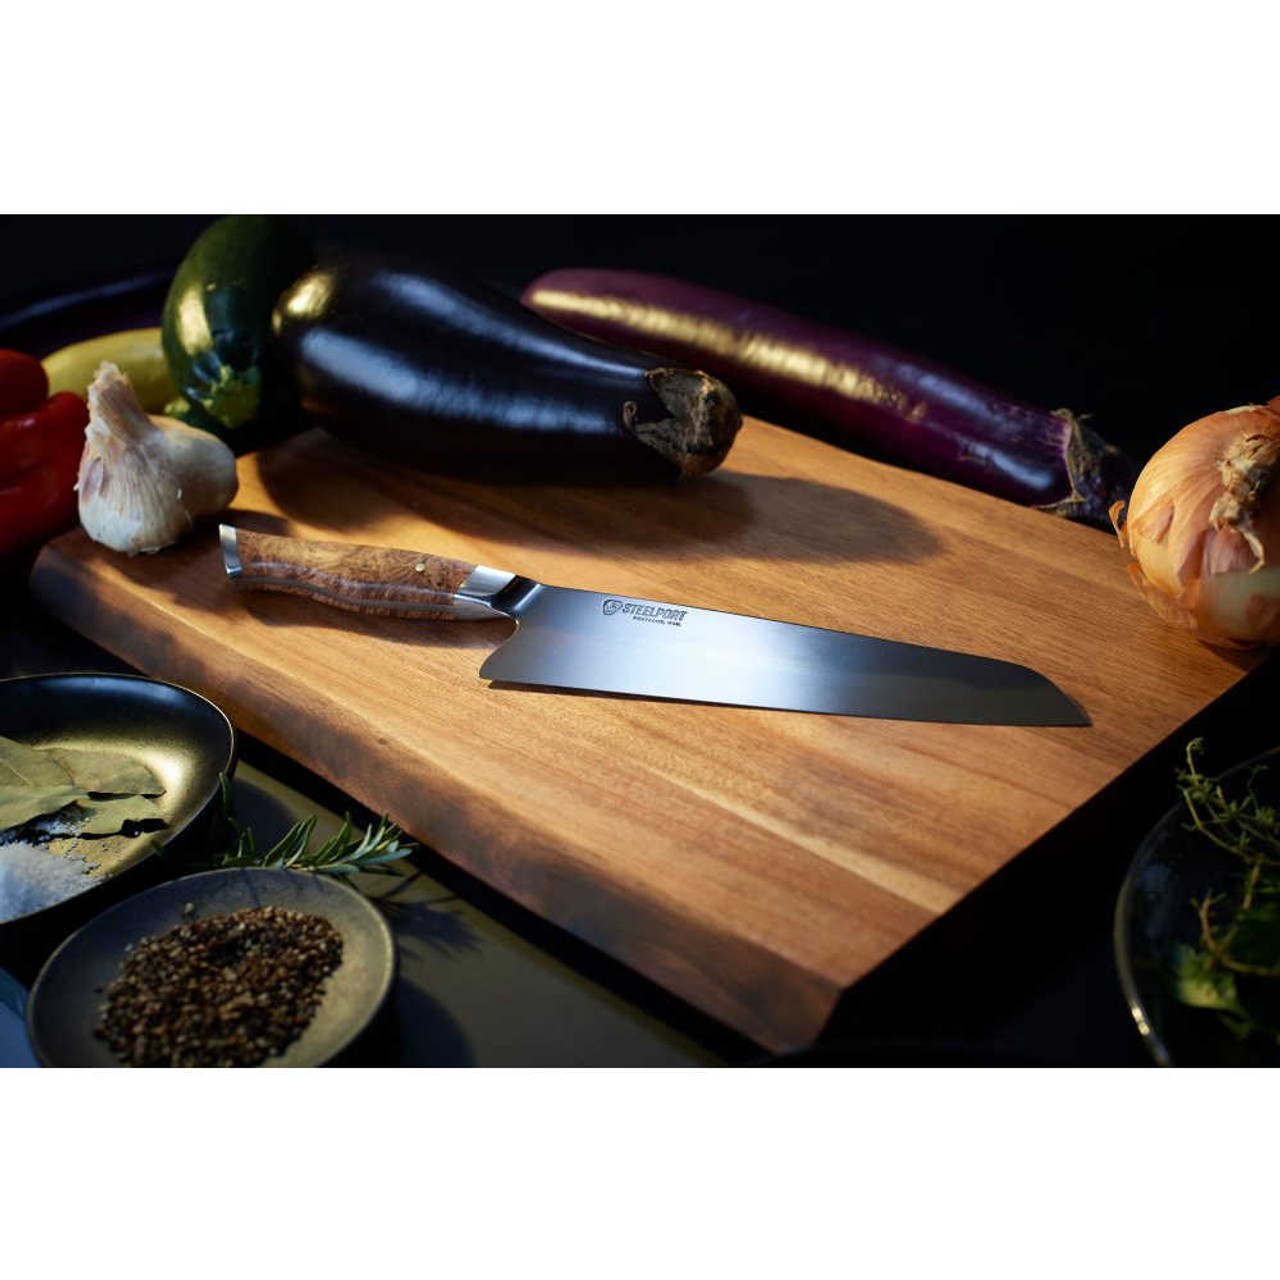 https://cdn11.bigcommerce.com/s-hccytny0od/images/stencil/1280x1280/products/4795/19606/STEELPORT_Chefs_Knife_8-Inch_1__40809.1655836559.jpg?c=2?imbypass=on